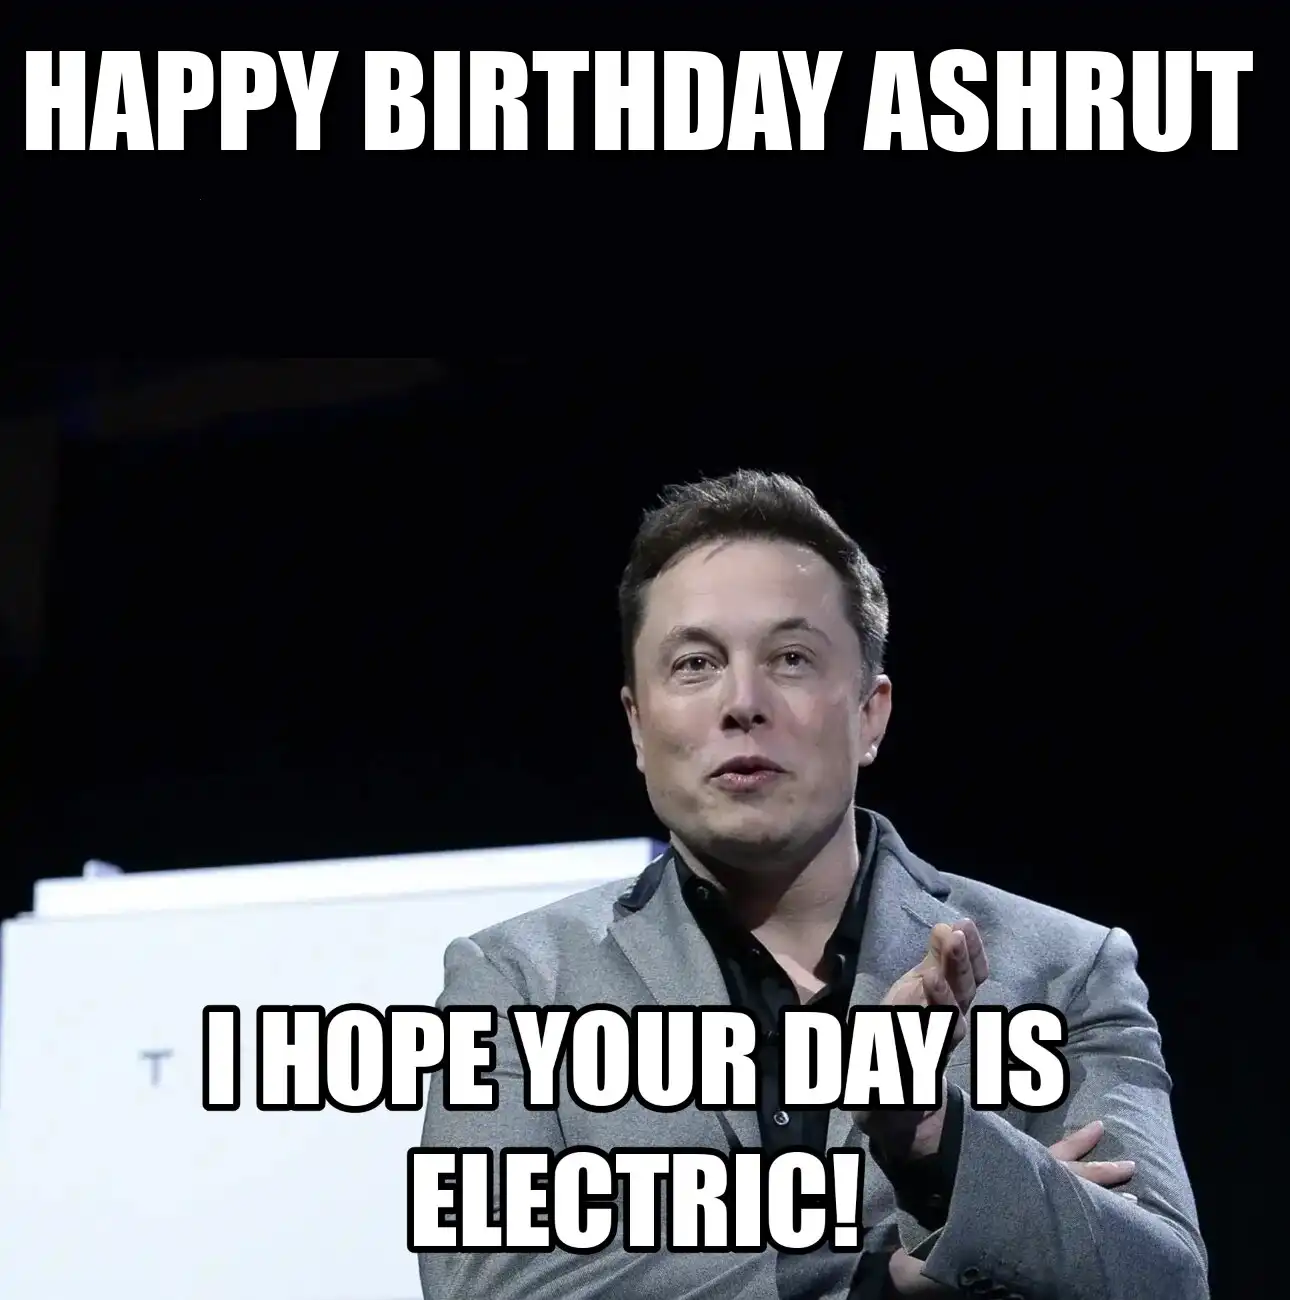 Happy Birthday Ashrut I Hope Your Day Is Electric Meme